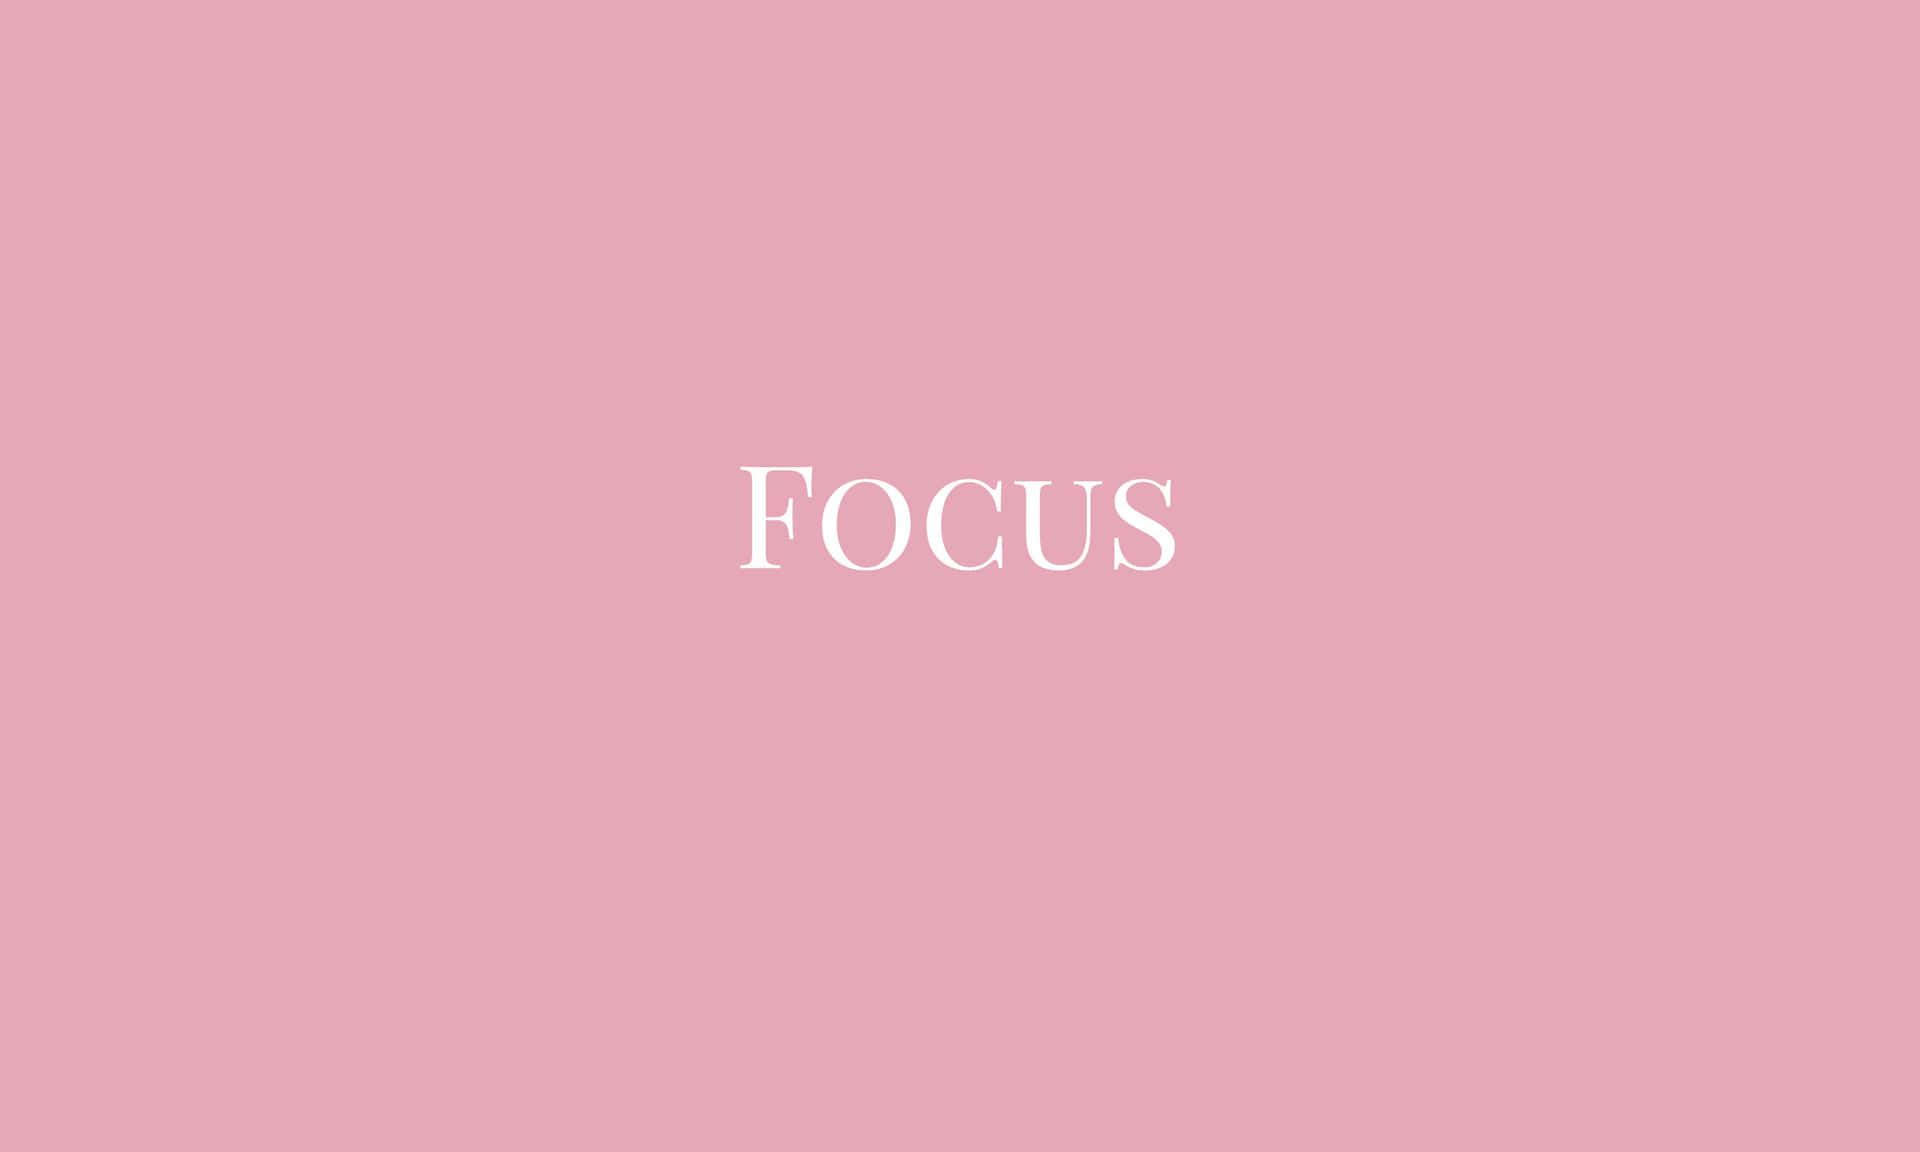 Focus - A Pink Background With The Word Focus Wallpaper